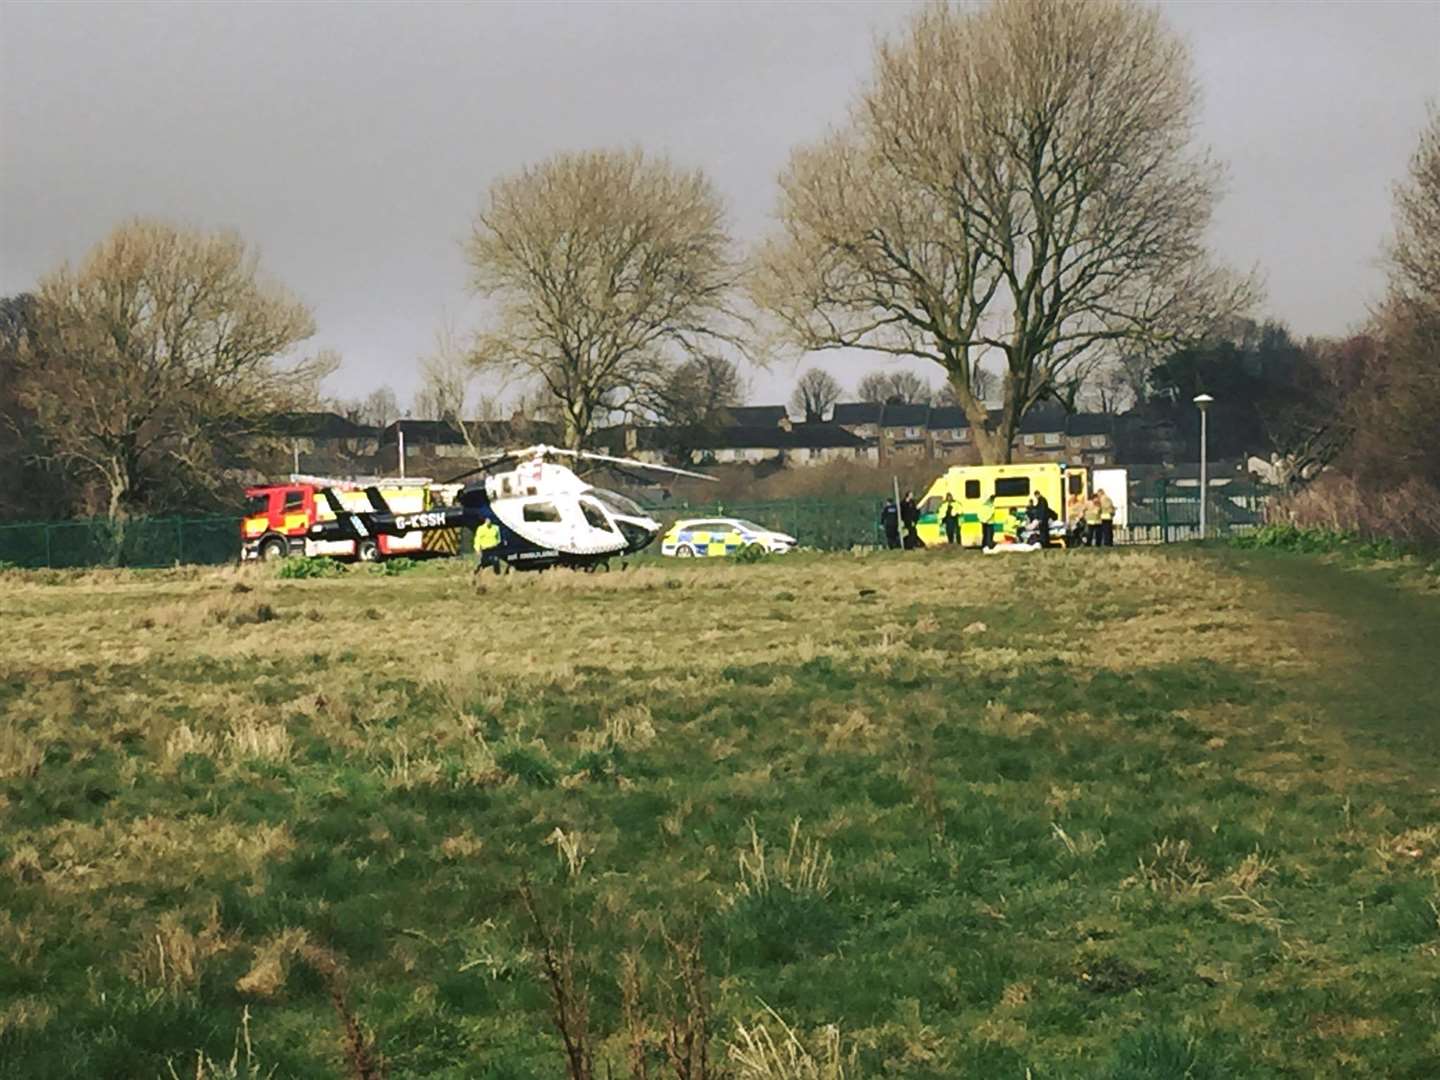 Emergency services vehicles and an air ambulance following the accident. Picture courtesy of Laura Lou Morgan.